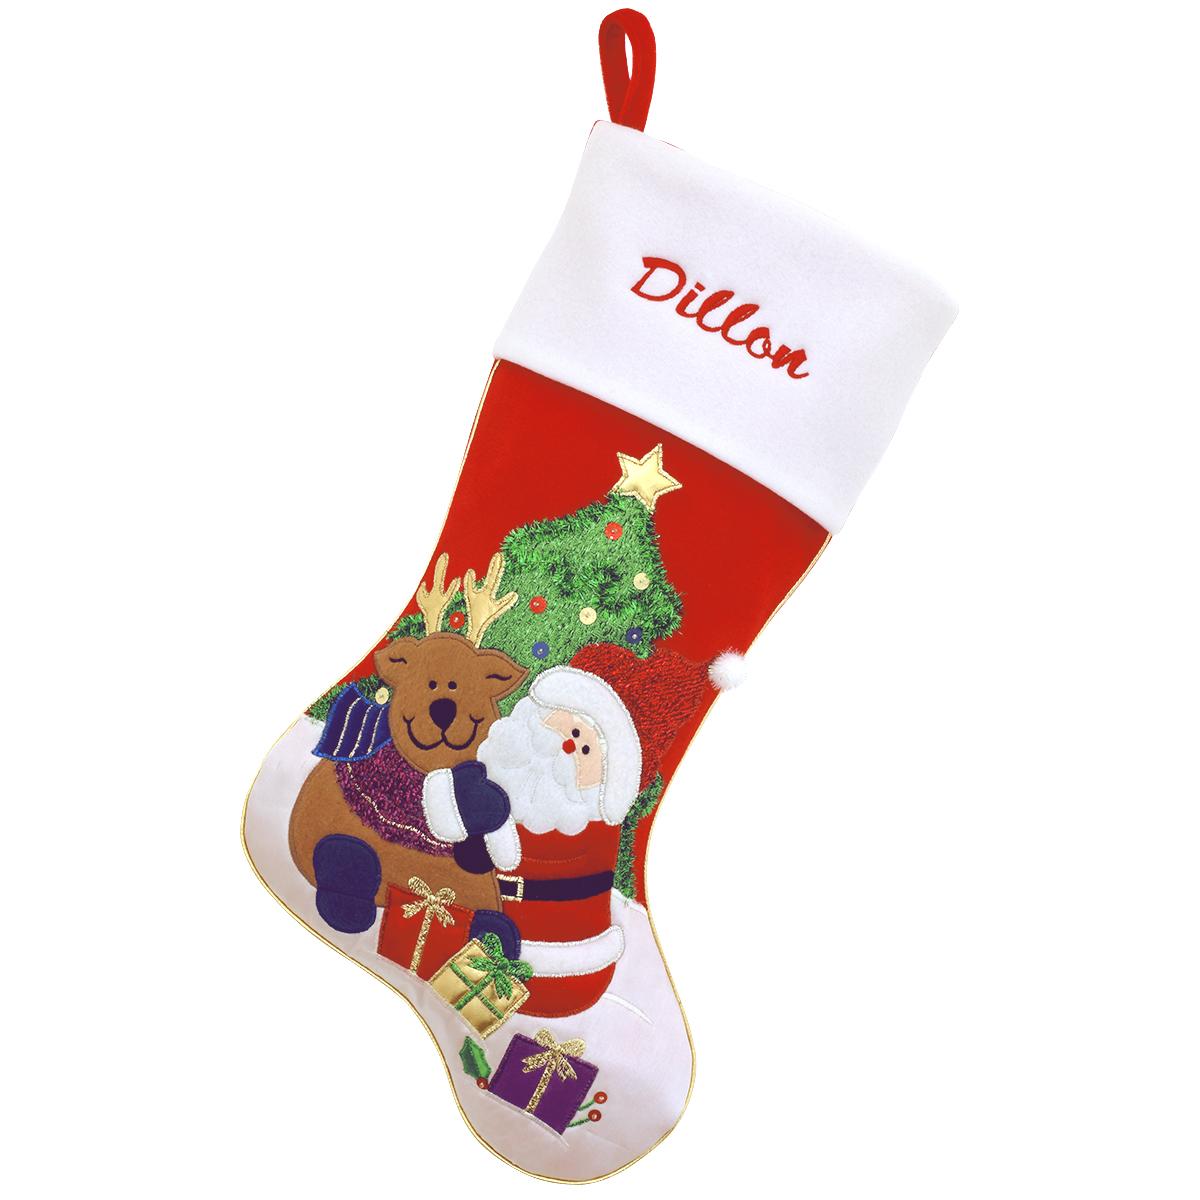 Santa and reindeer in front of a Christmas tree on a personalized red velvet stocking with white cuff.